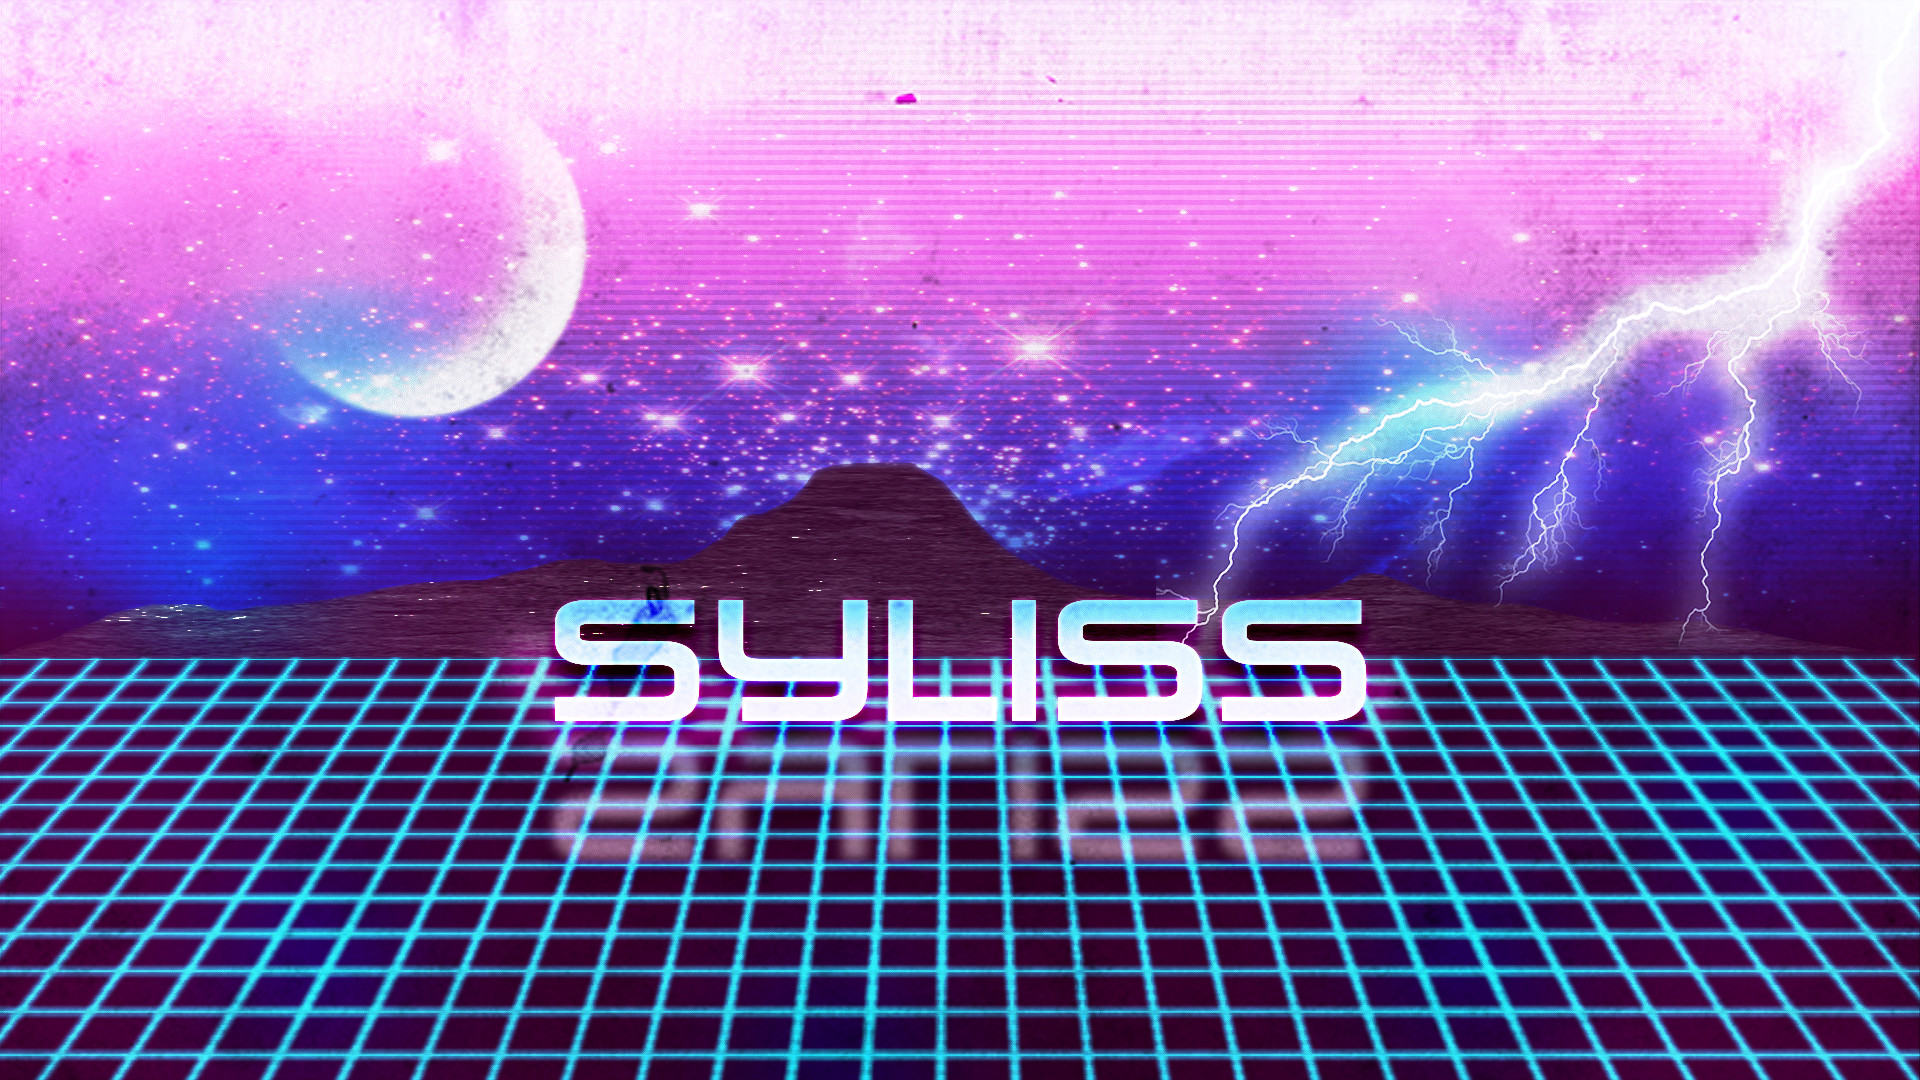 1920x1080 80's Inspired Wallpaper by Syliss1 80's Inspired Wallpaper by Syliss1